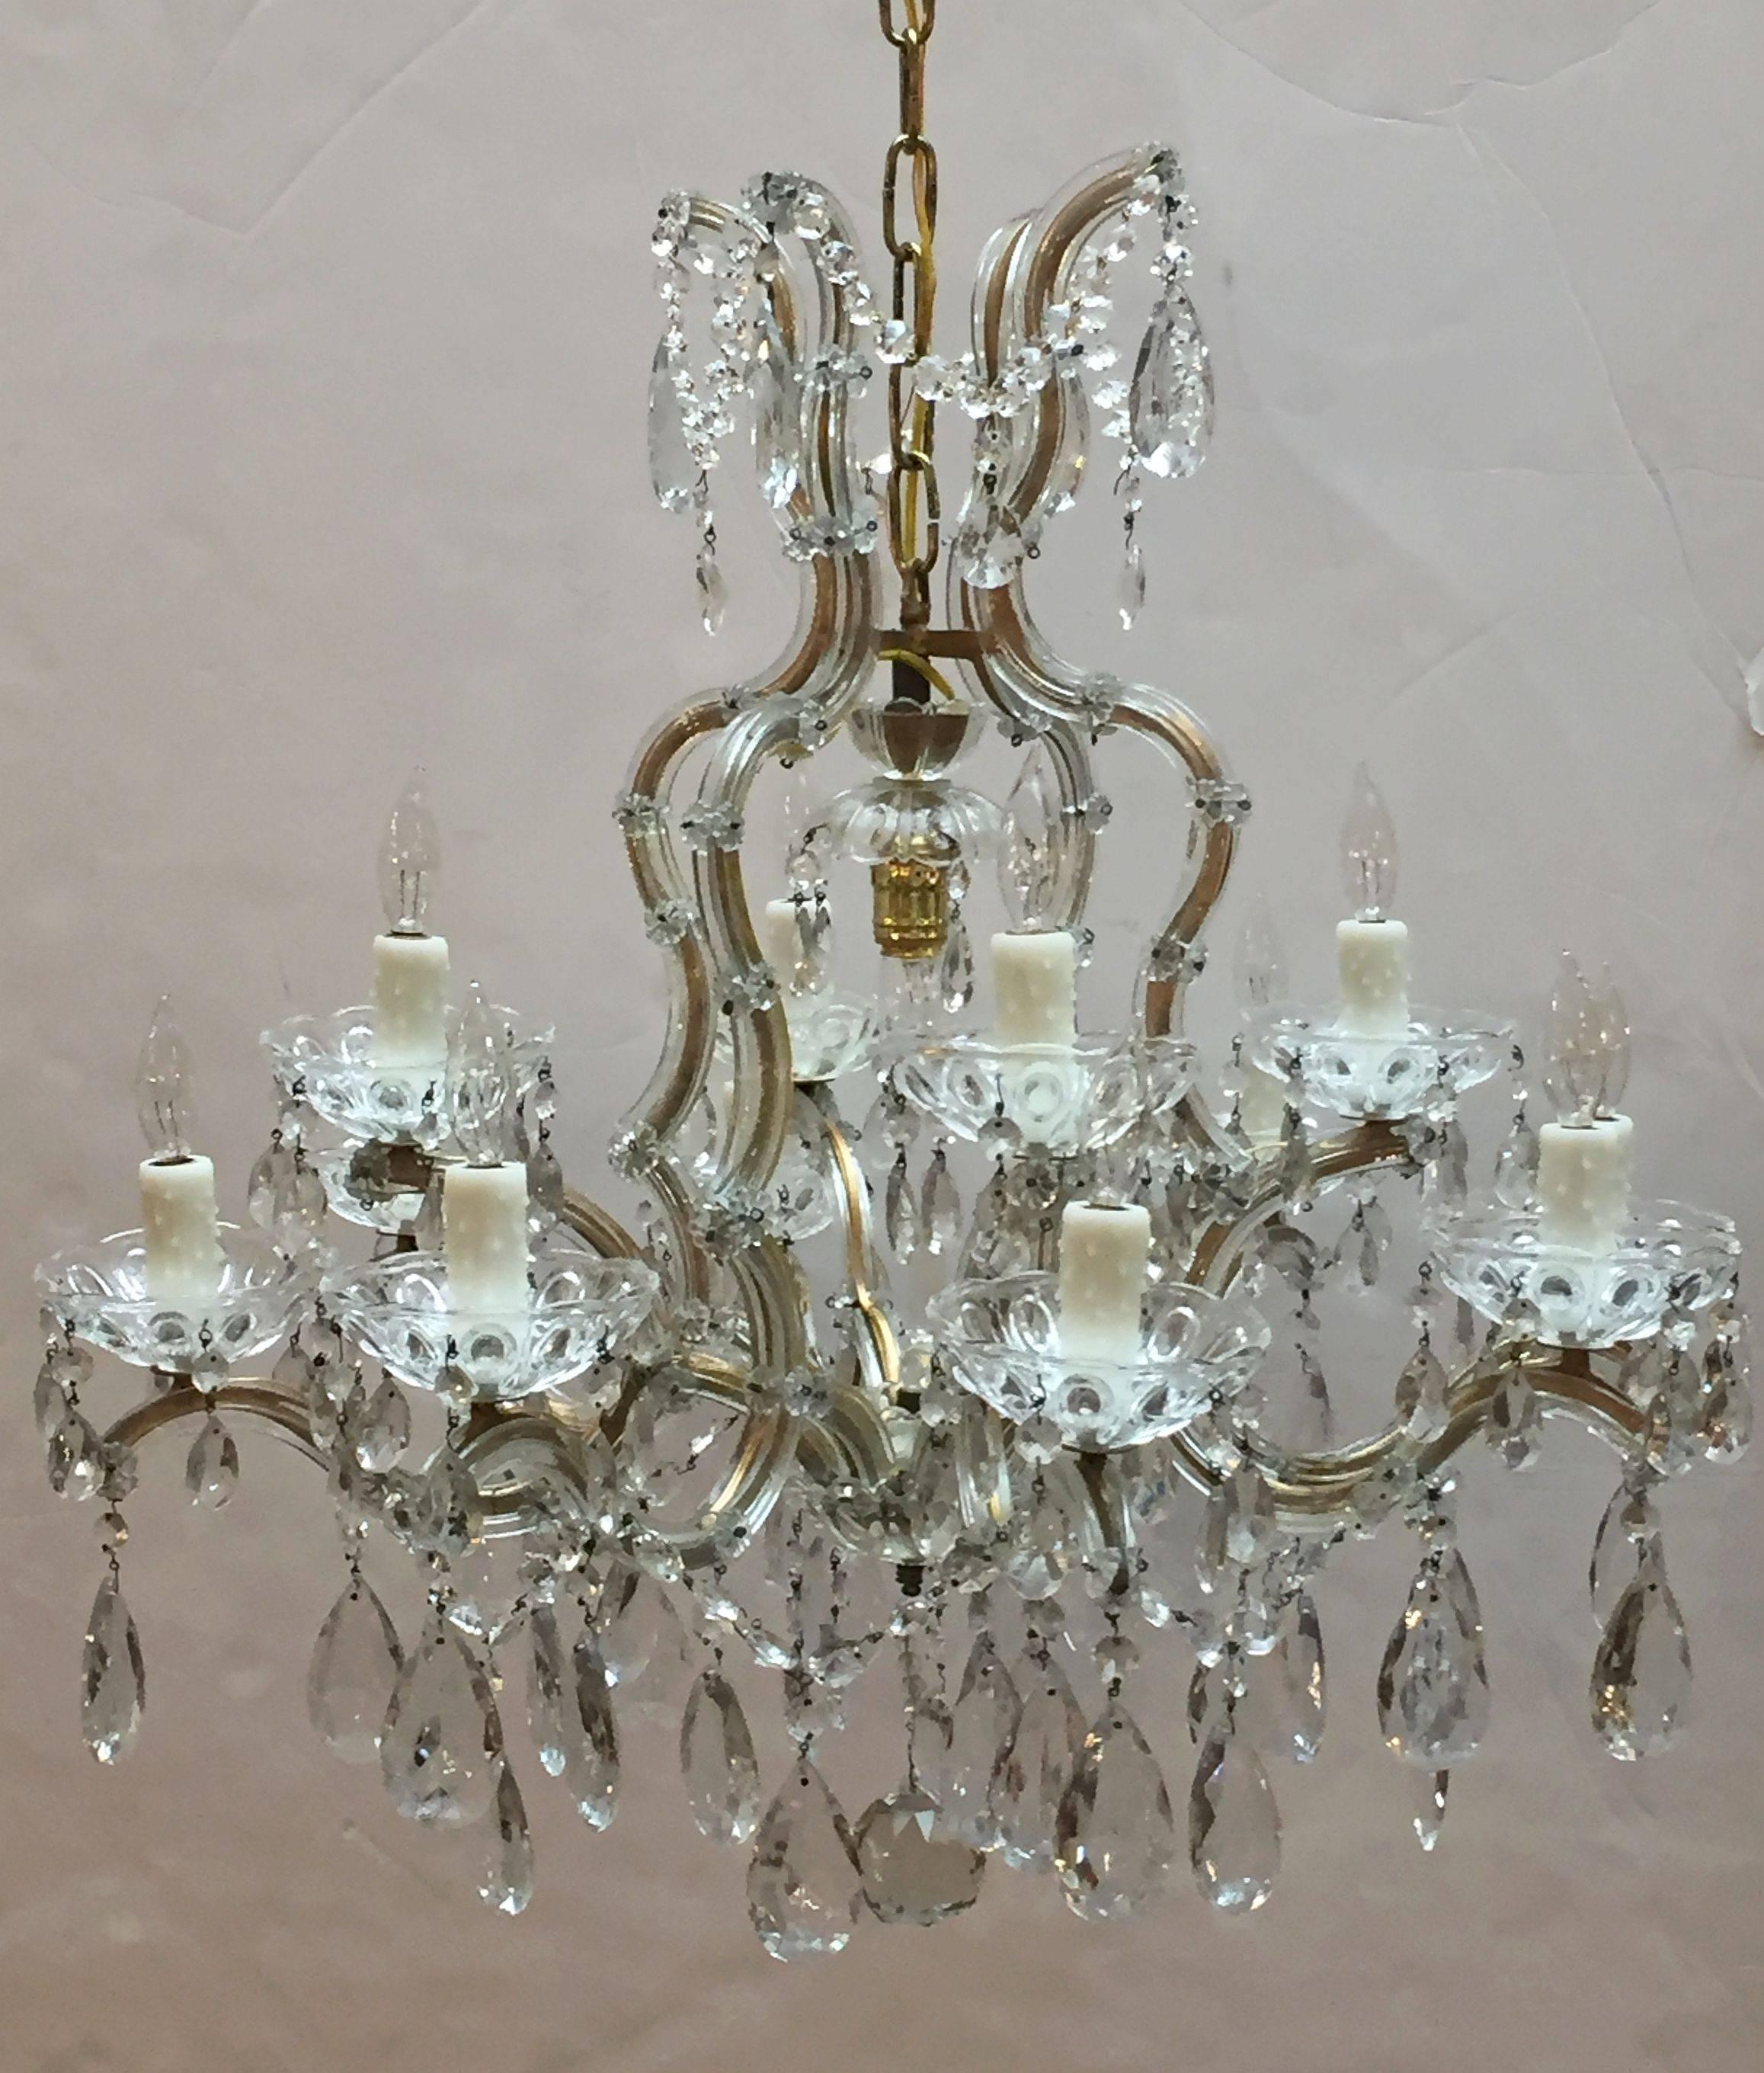 Faceted Maria Theresa Seventeen-Light Crystal Drop Chandelier from Italy